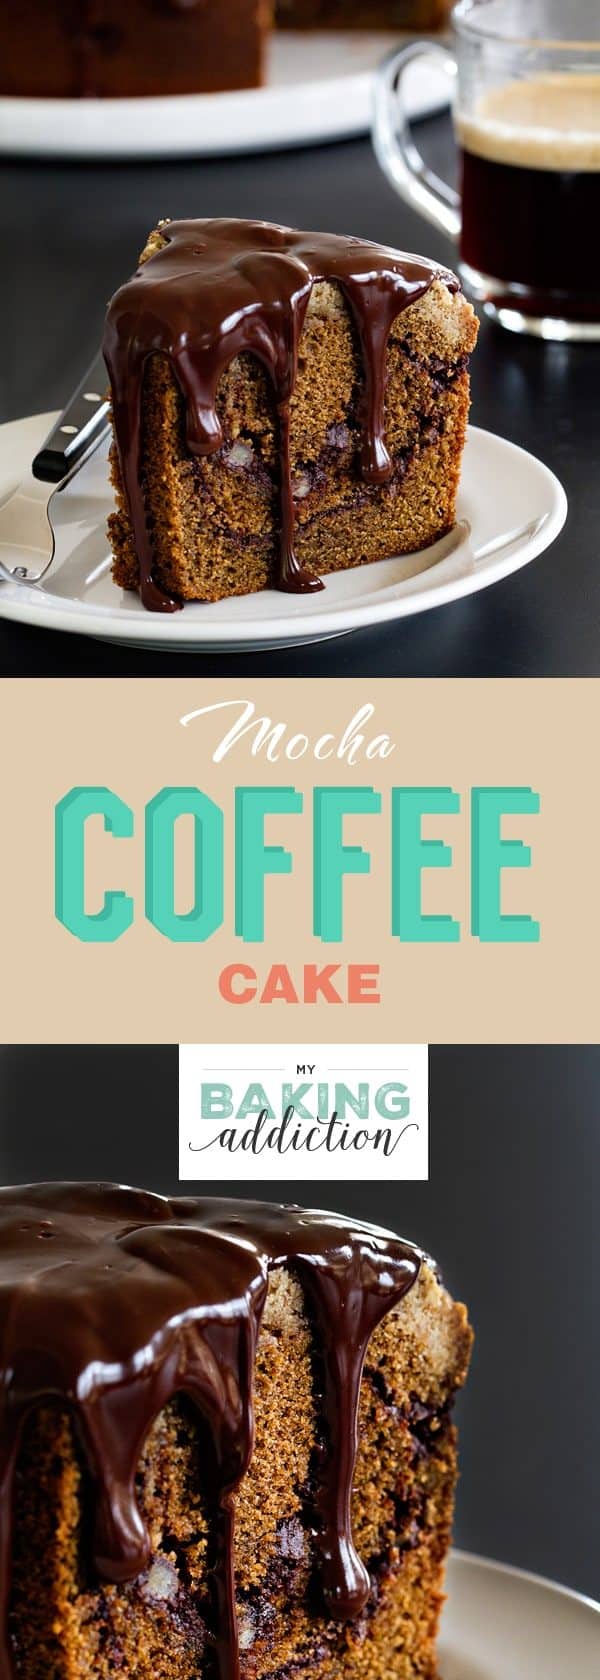 Mocha Coffee Cake is swirled with chocolate and topped with an espresso crumb topping. The Kahlua ganache makes it absolutely amazing.